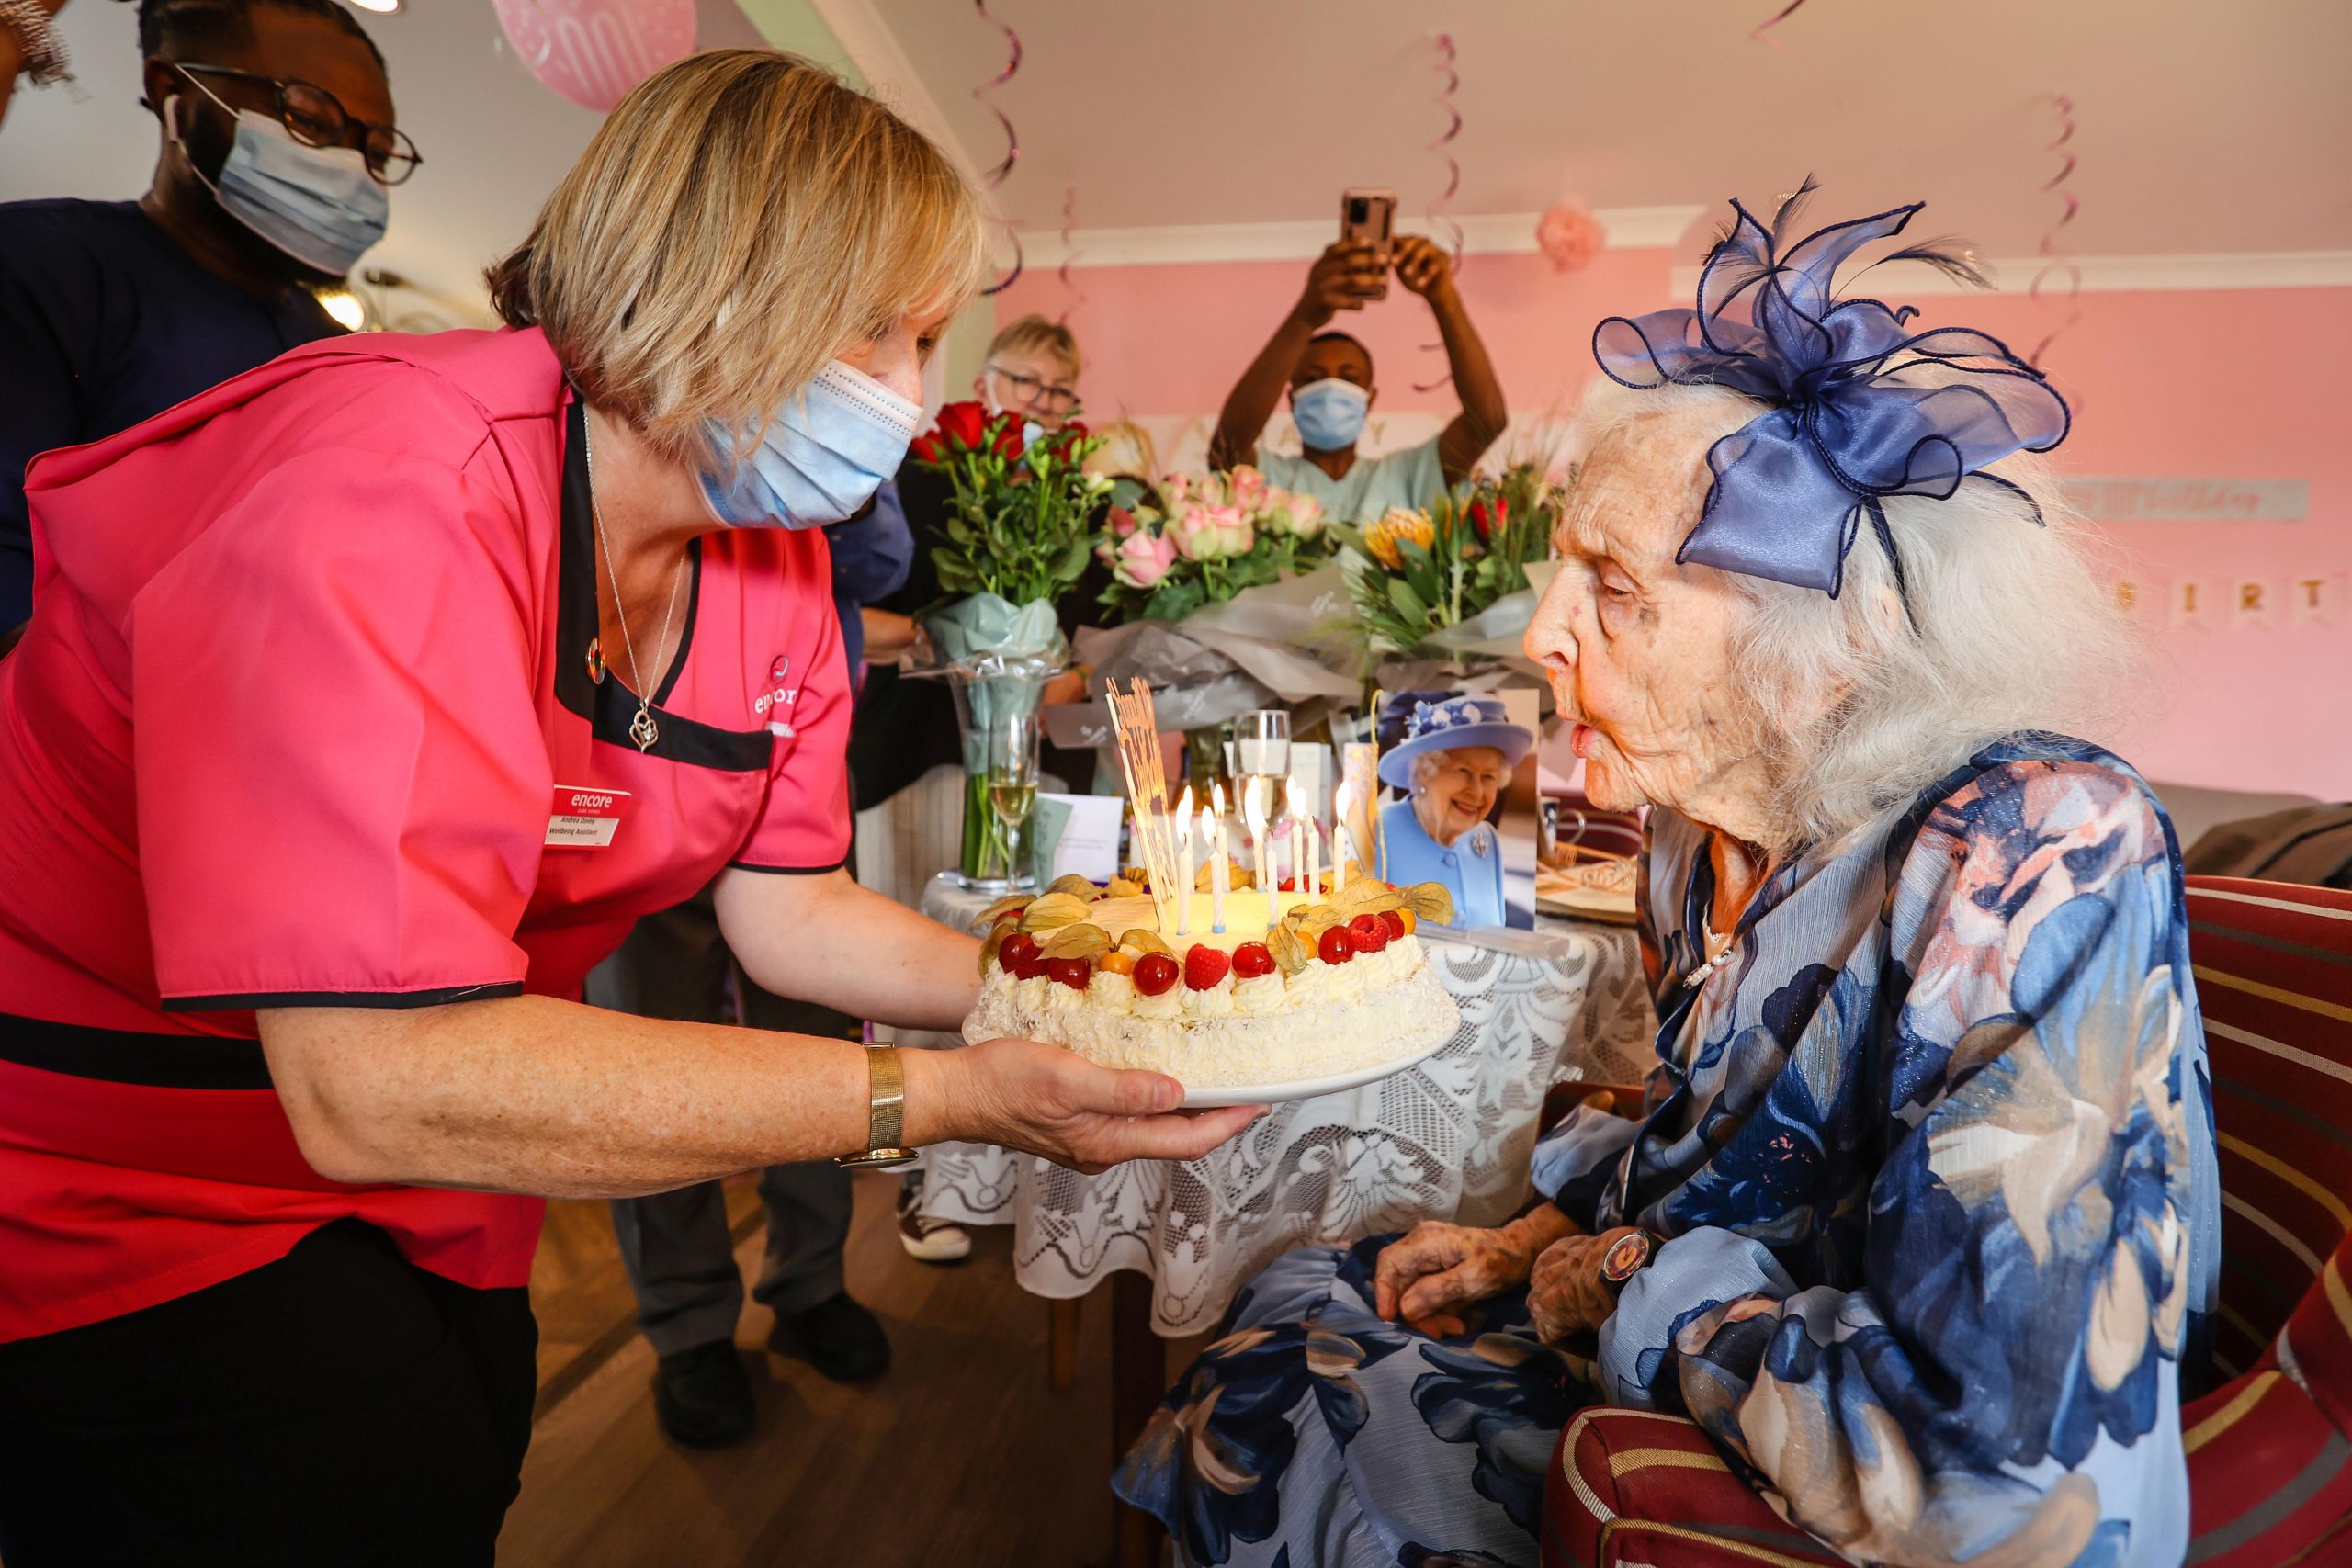 Fairmile Grange resident blowing out candles on her birthday cake for her 100th birthday